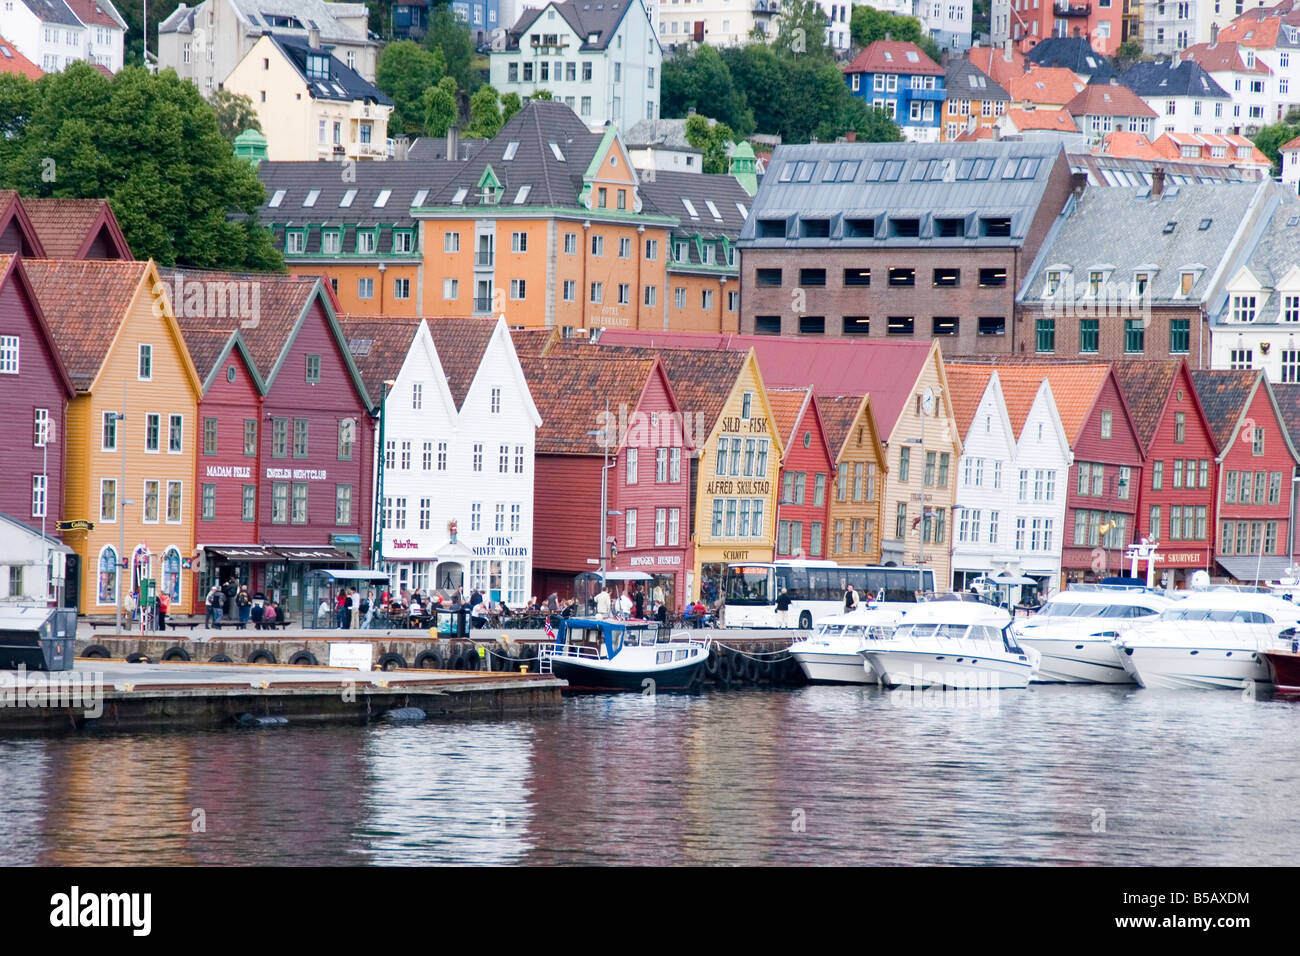 The mishapen and colorful storefronts line the Bryggen dock, a UNESCO World Heritage site, in Bergen Norway Stock Photo